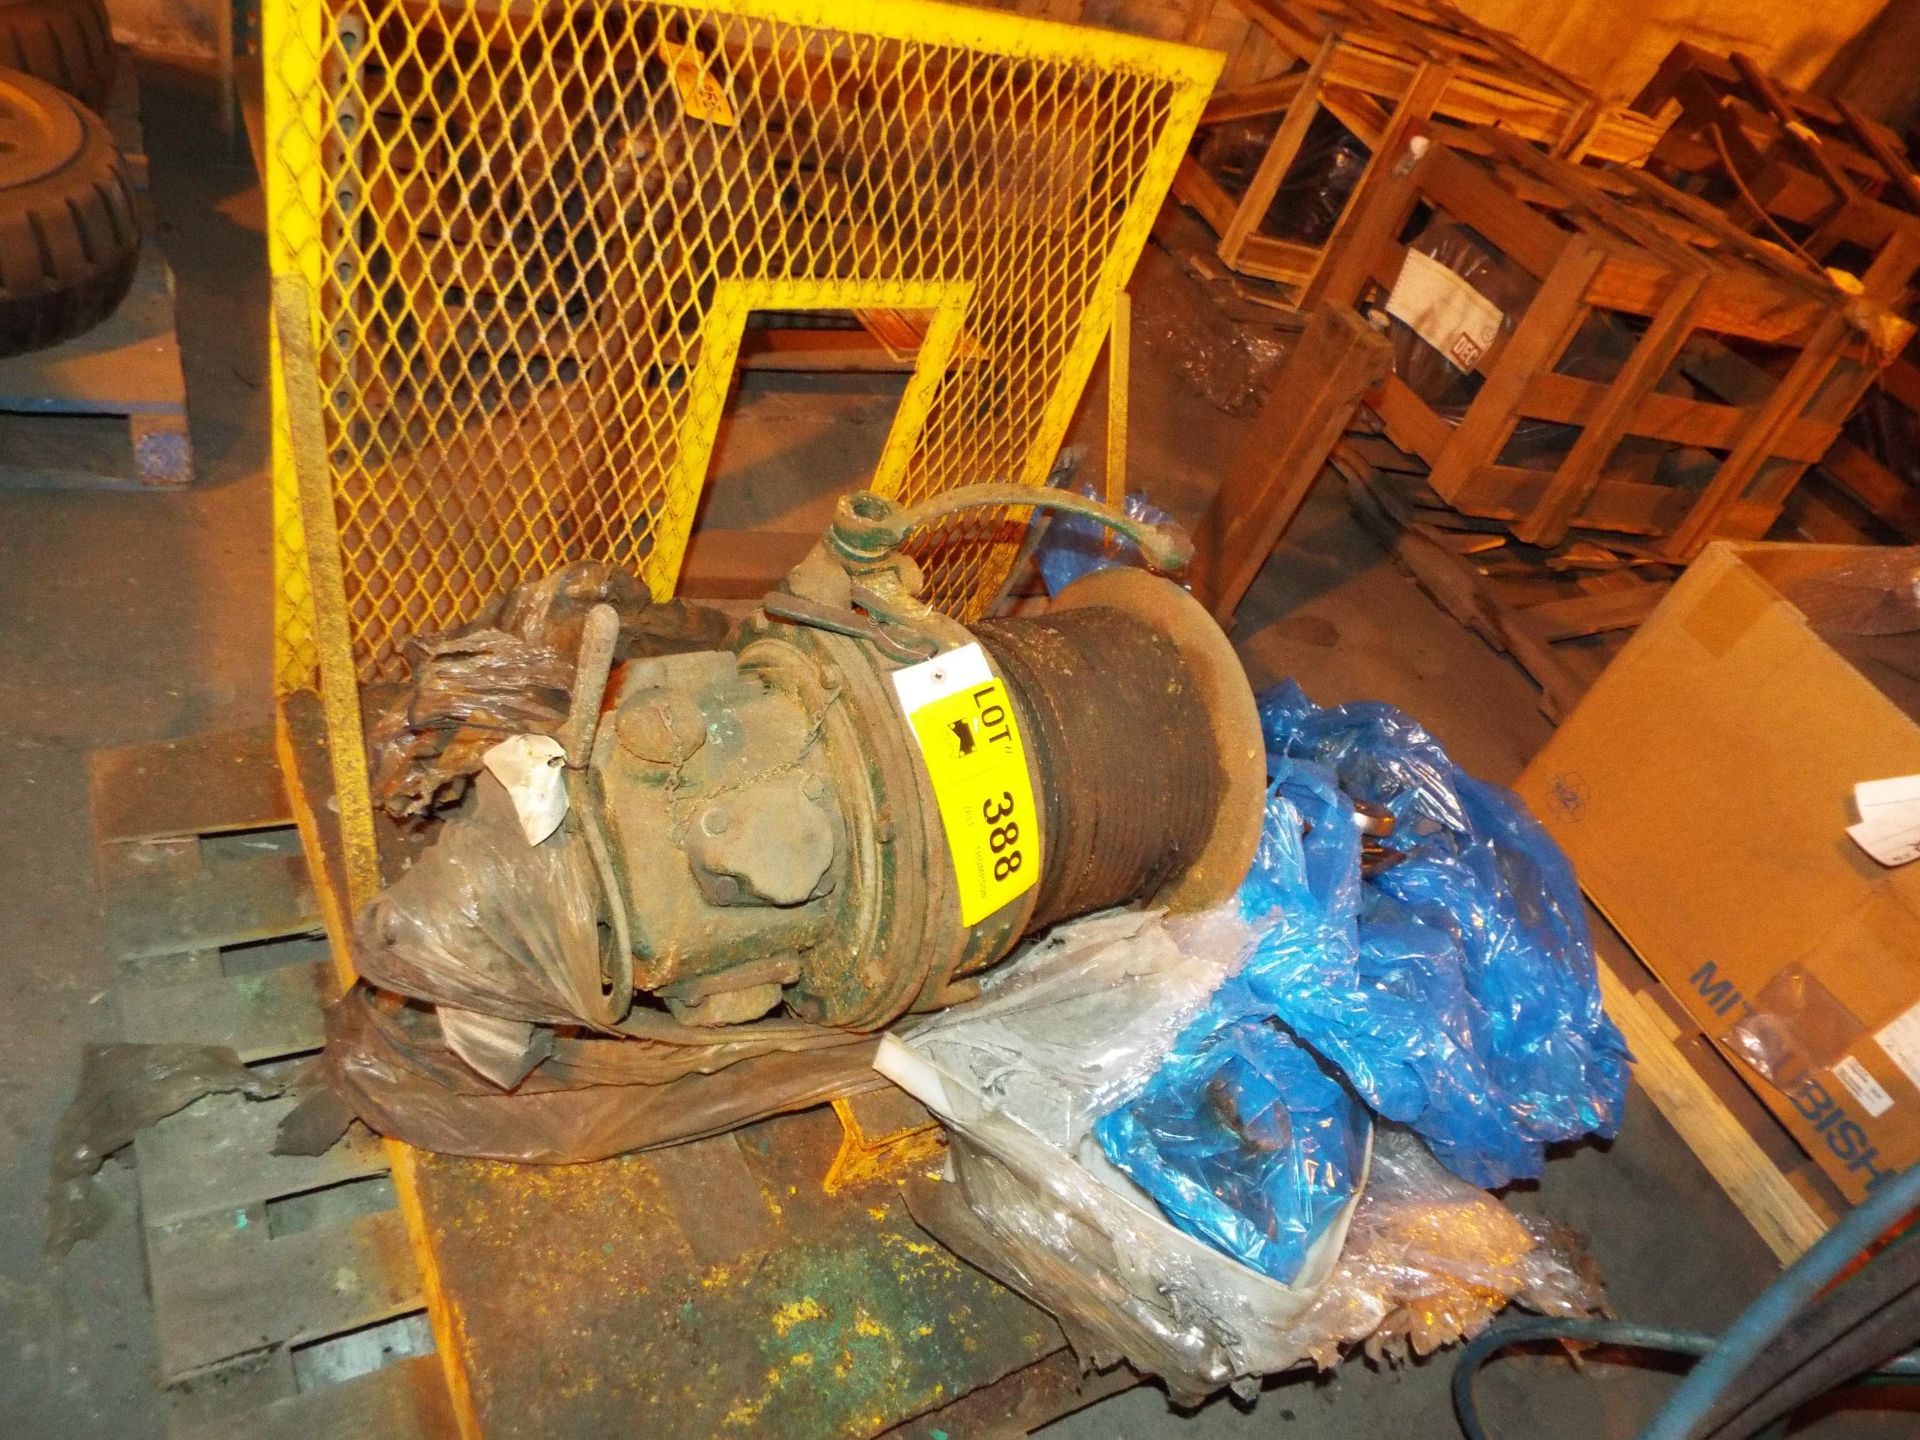 LOT/ CONTENTS OF SKID - PNEUMATIC TUGGER WINCH